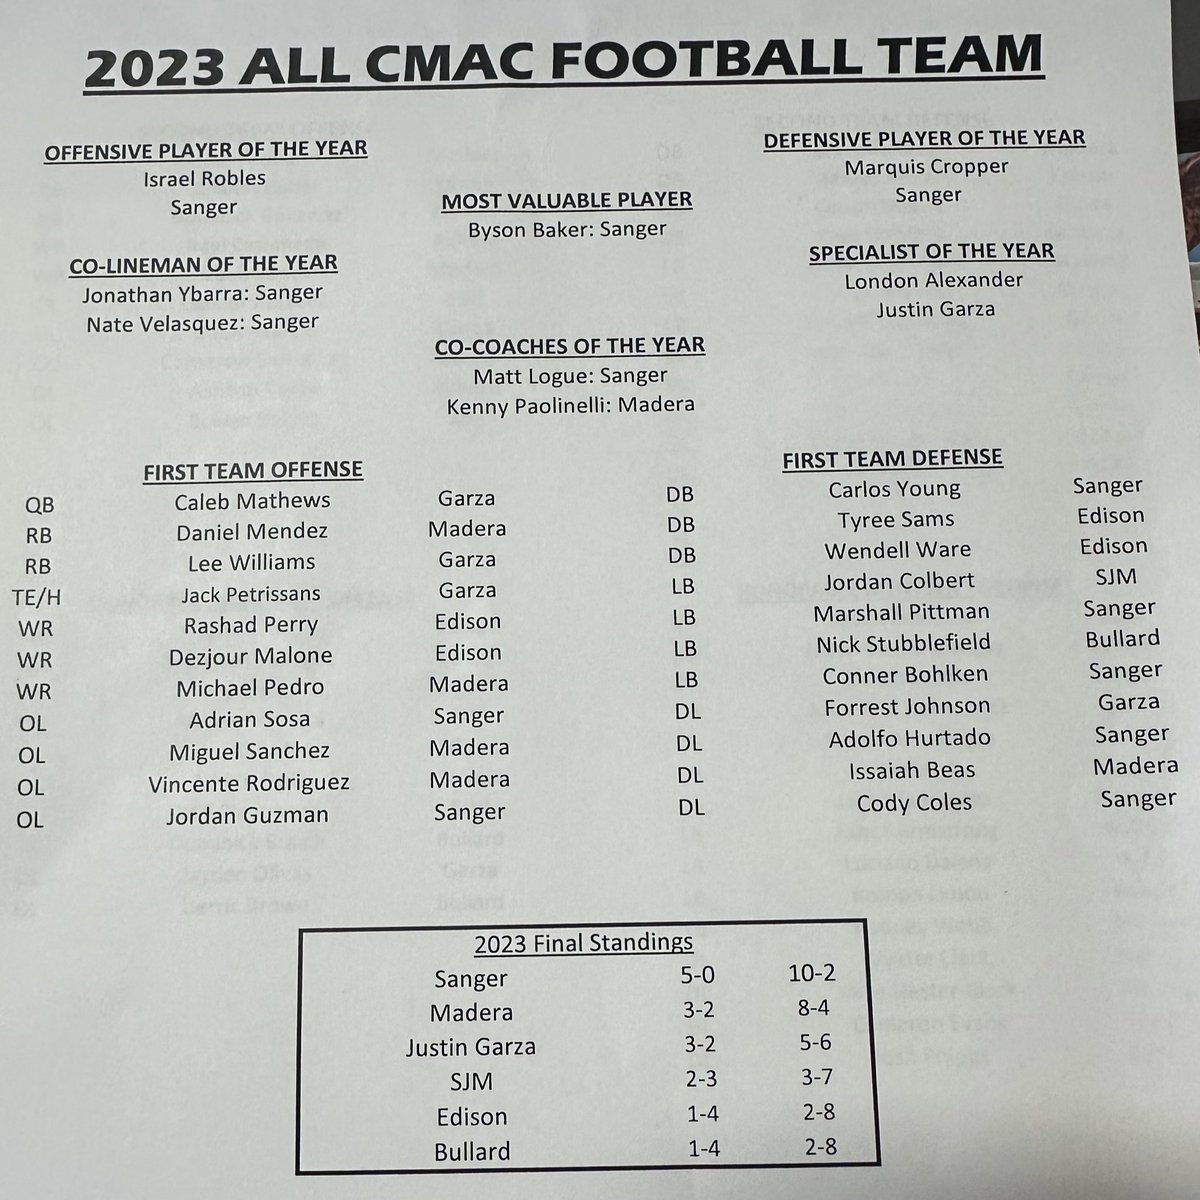 The All-CMAC football first team offense and defense. @SangerApaches dominate the awards:

MVP - @BrysonnBaker
OPOY - @Israel_Robles27
DPOY - @cropper_marquis
Specialist - @DonAlexander559
Co-linemen - @ybarra_78 and @Nate_v559
Co-coaches - Matt Logue and @CoachPaolinelli